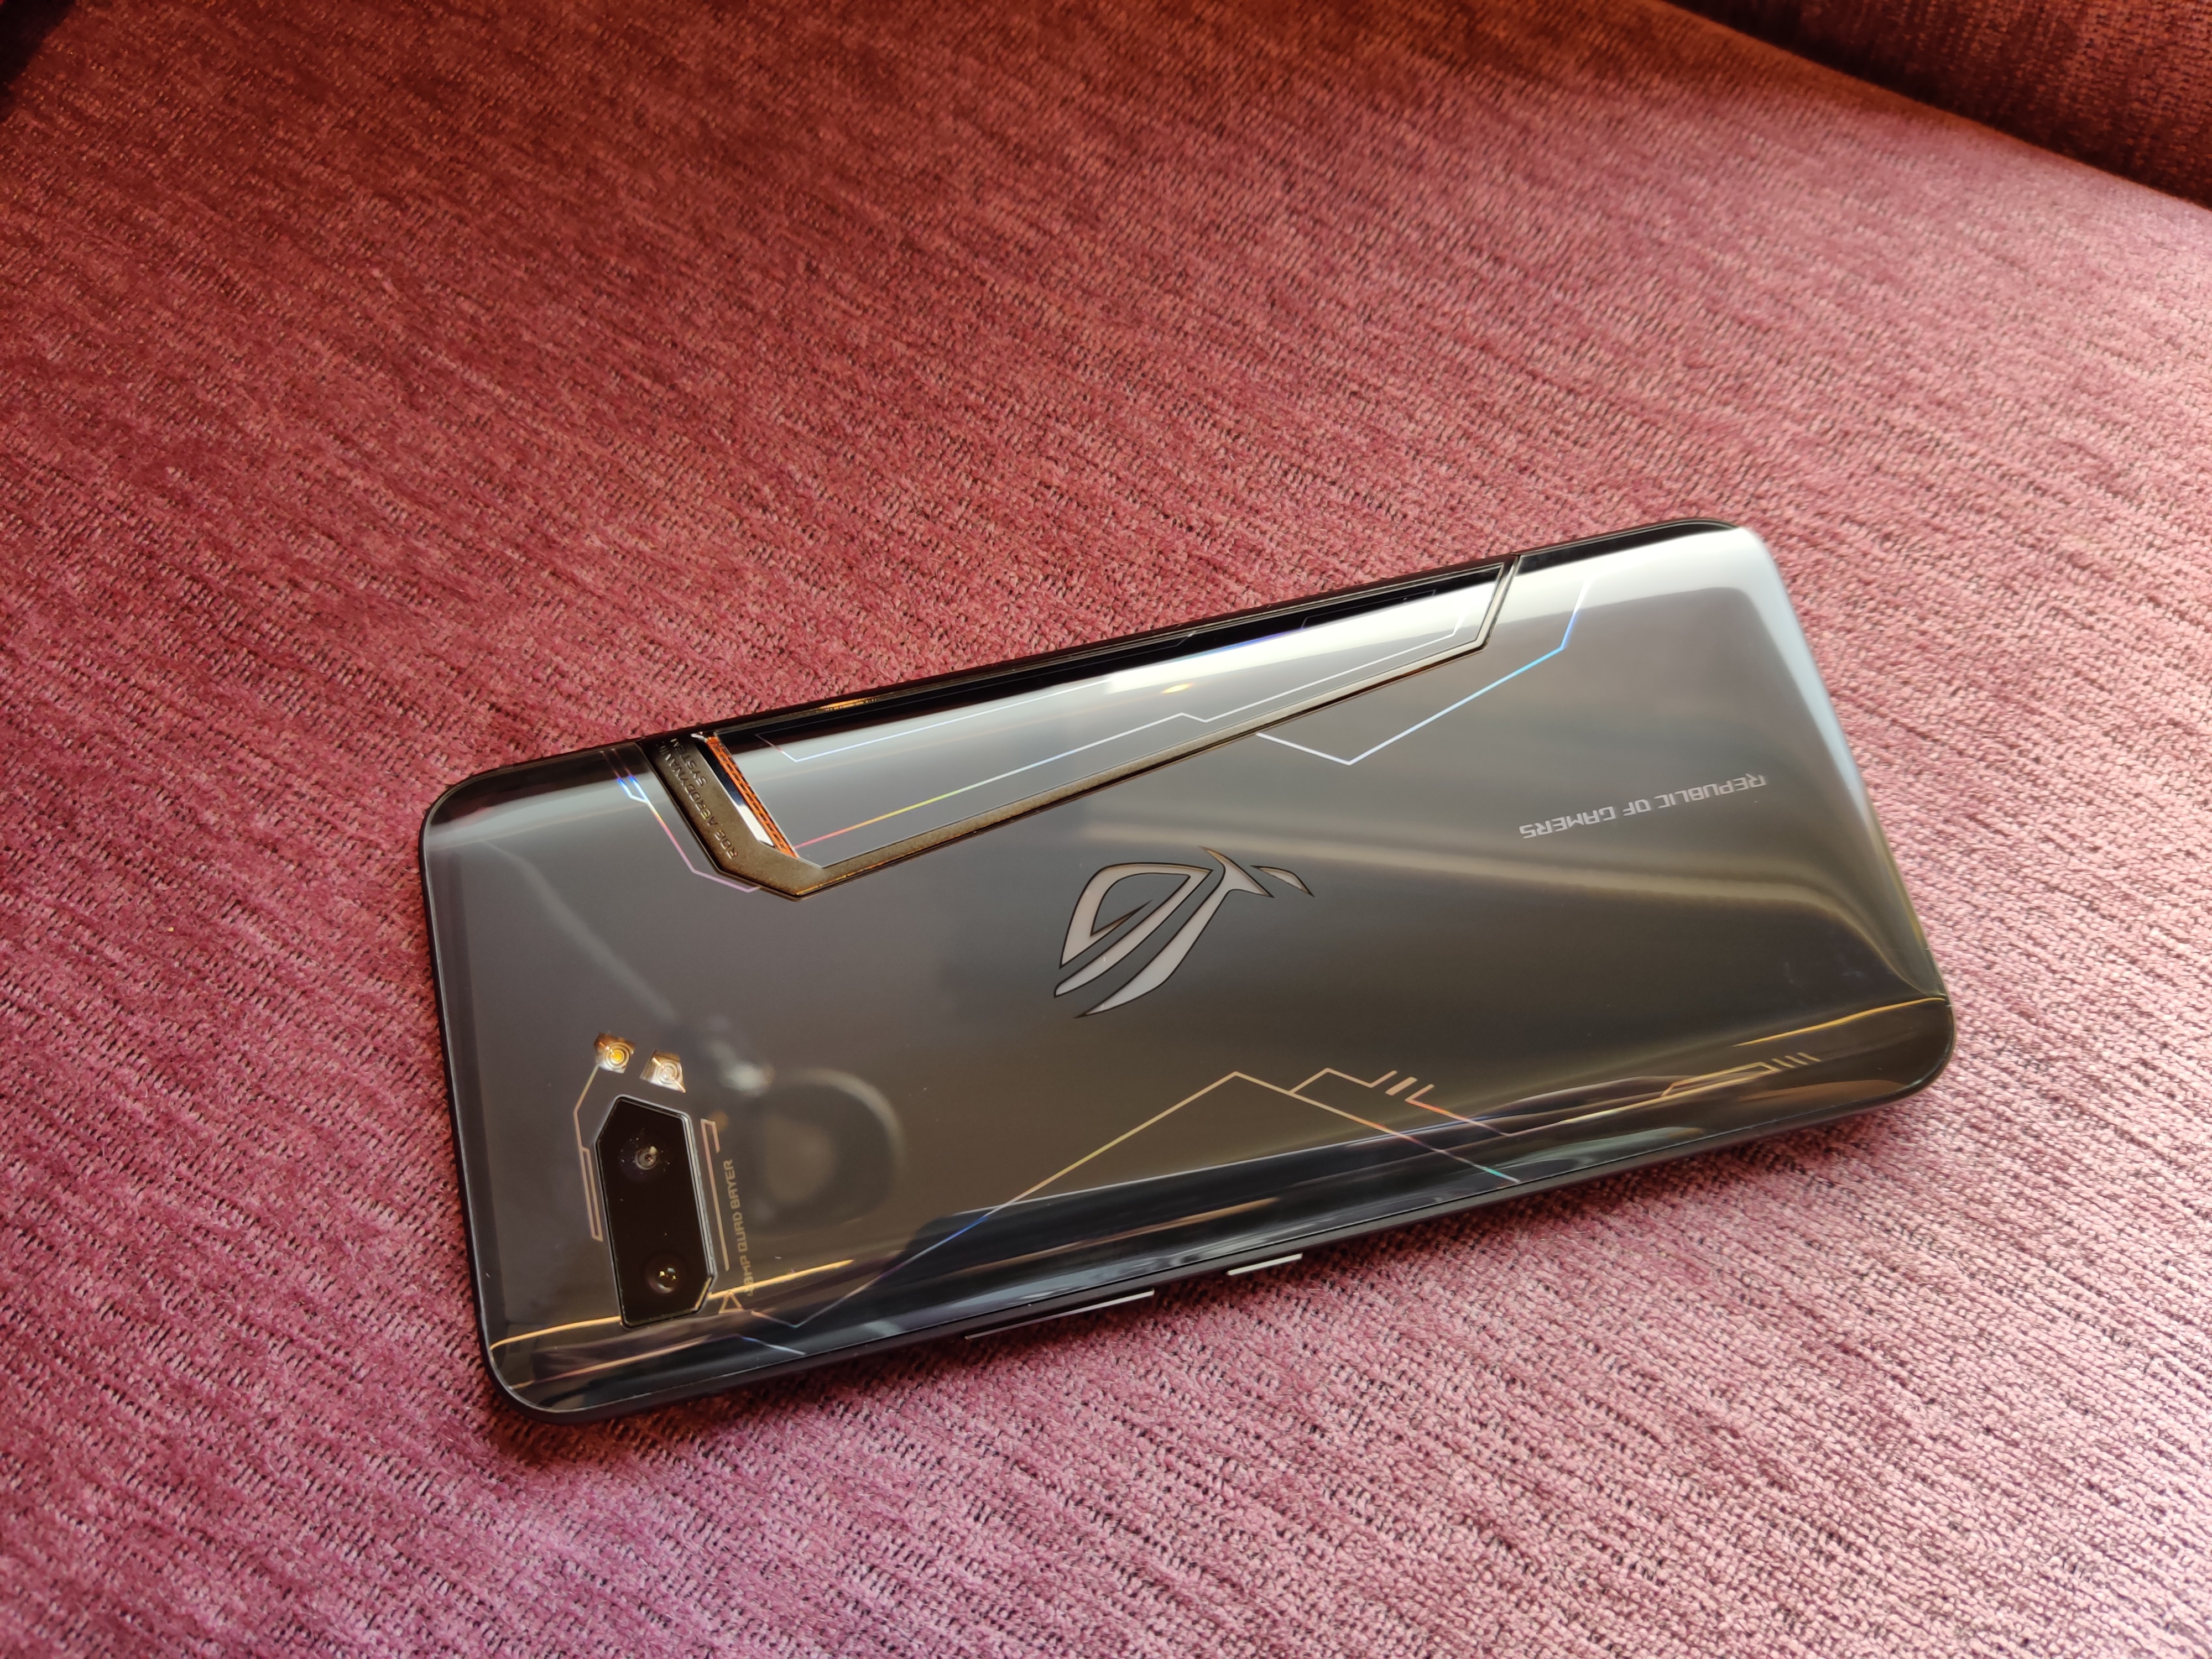 Asus ROG Phone 2 price review specification unboxing video online price in india